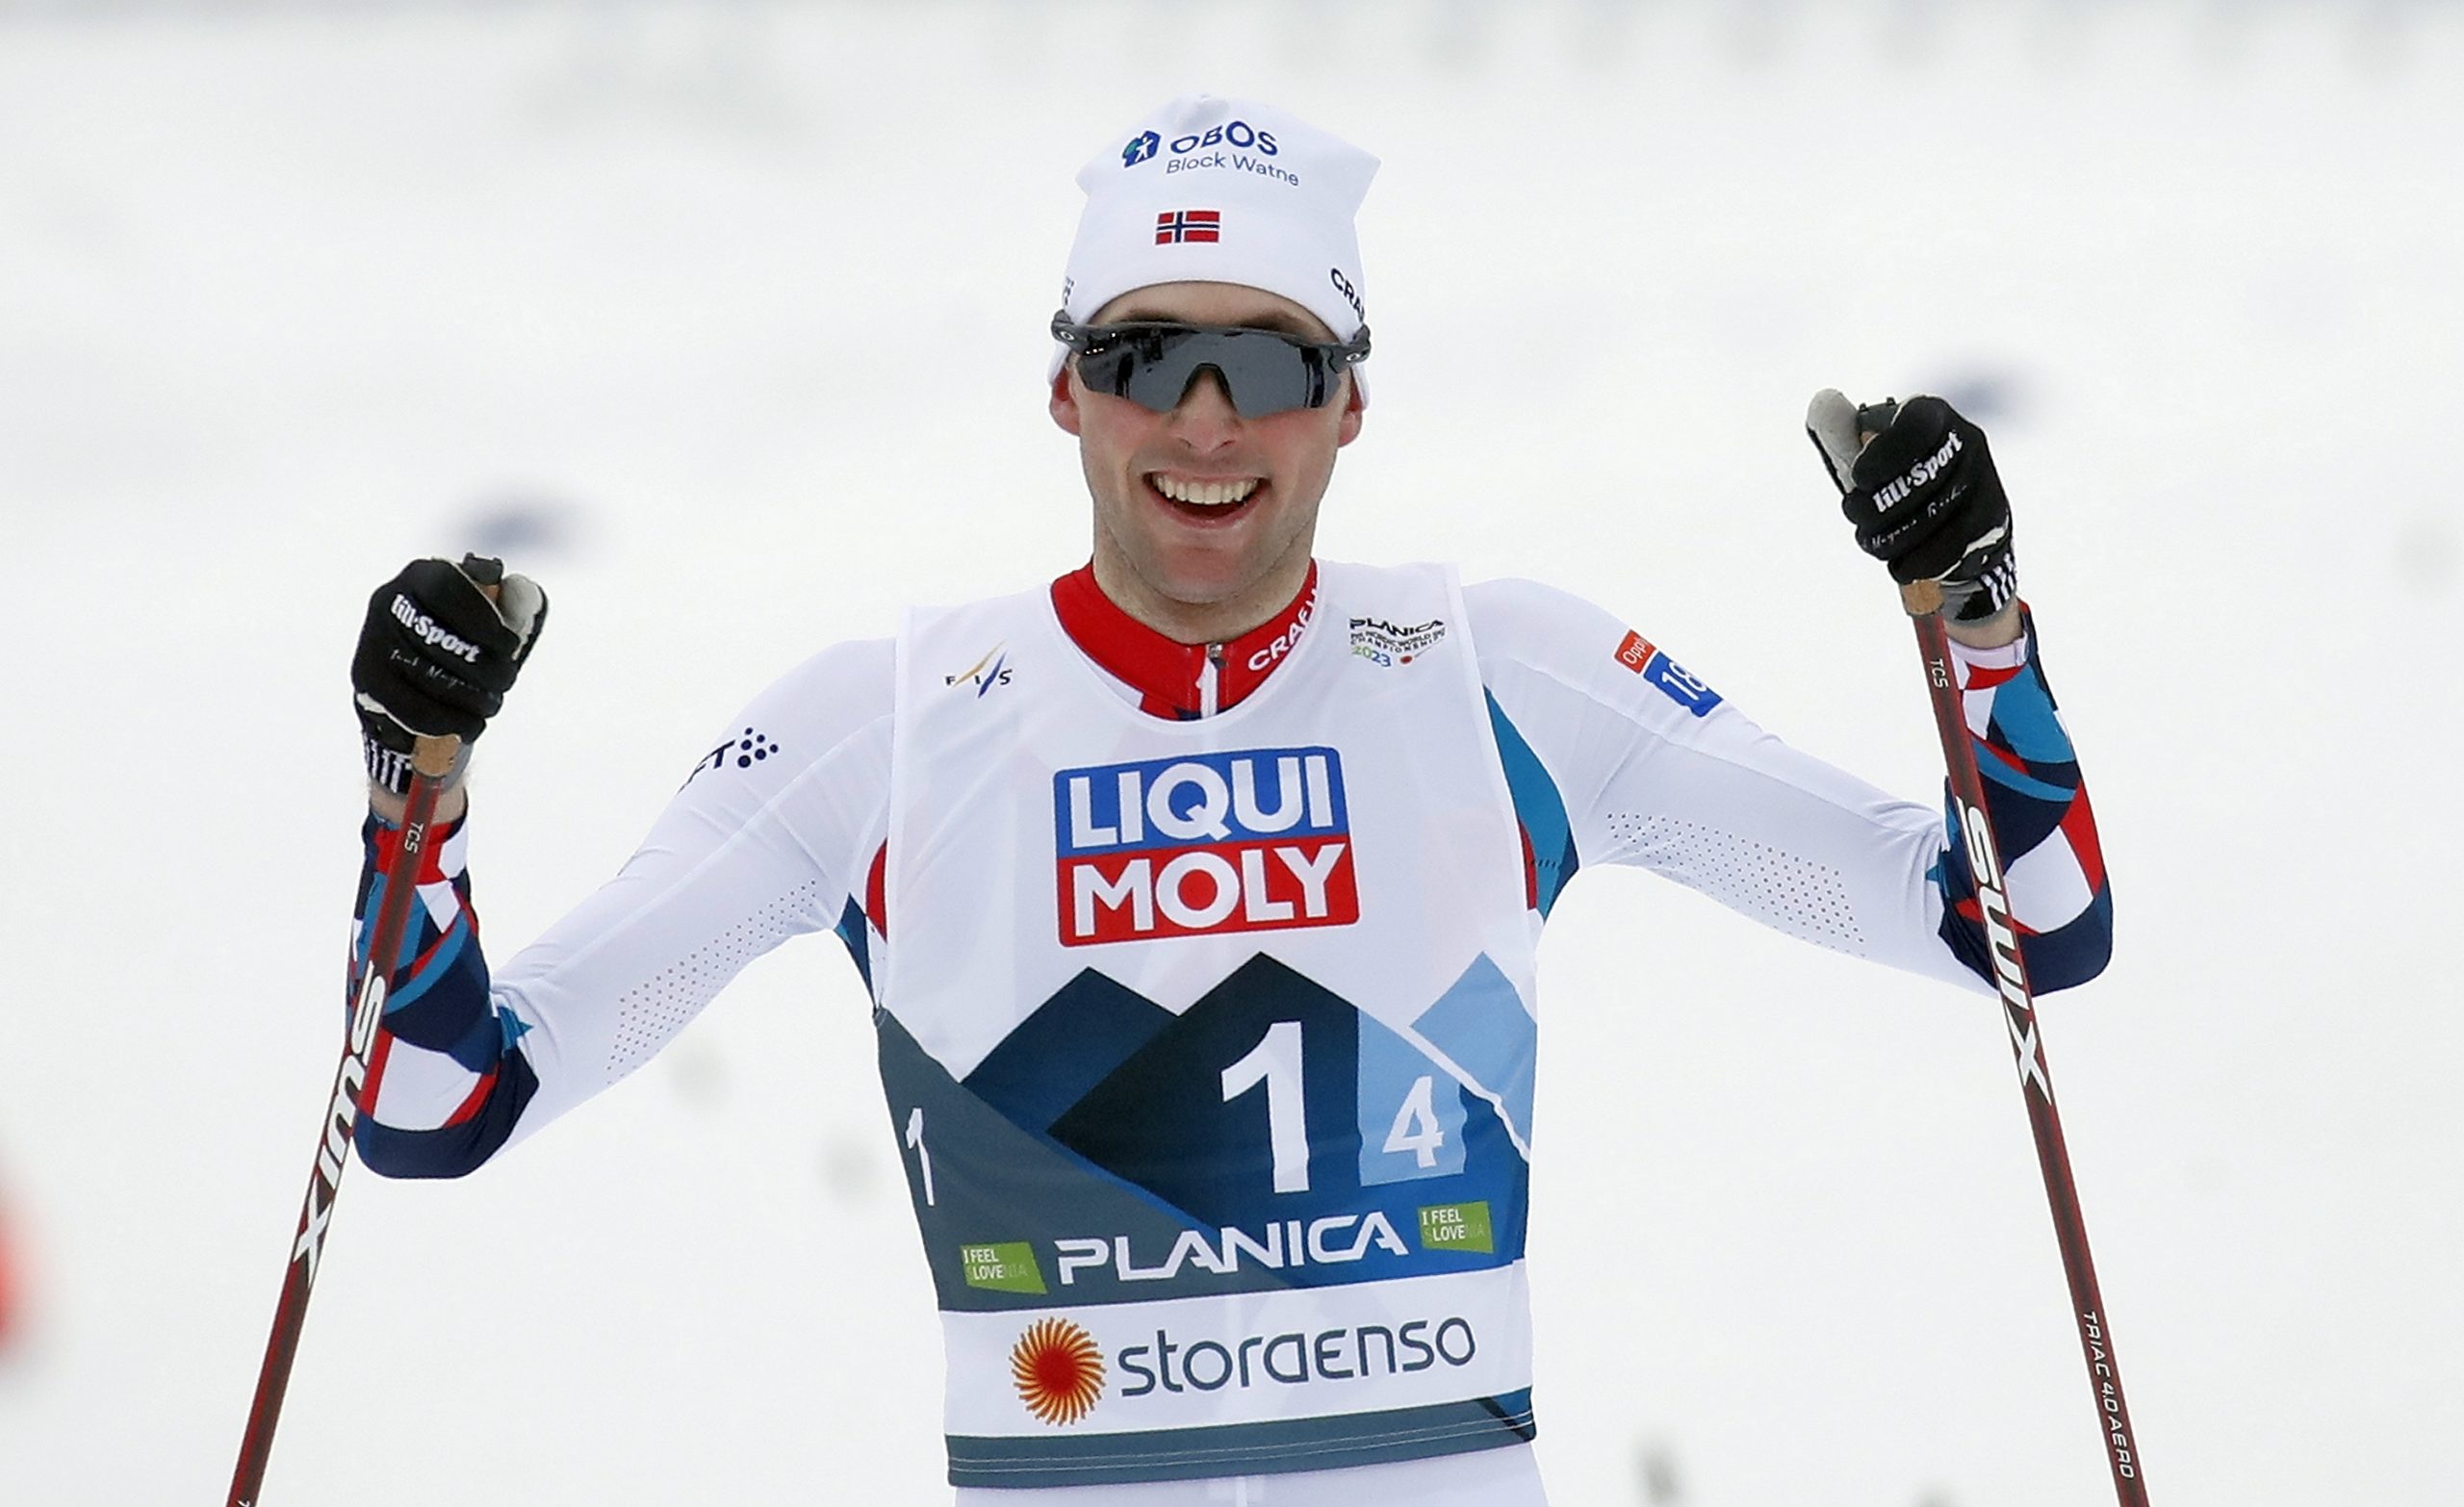 epa10492494 Jarl Manus Riiber of Norway reacts after finishing the Nordic Combined Mixed Team Gundersen Normal Hill competition round at the FIS Nordic Skiing World Championships in Planica, Slovenia, 26 February 2023.  EPA/ANTONIO BAT